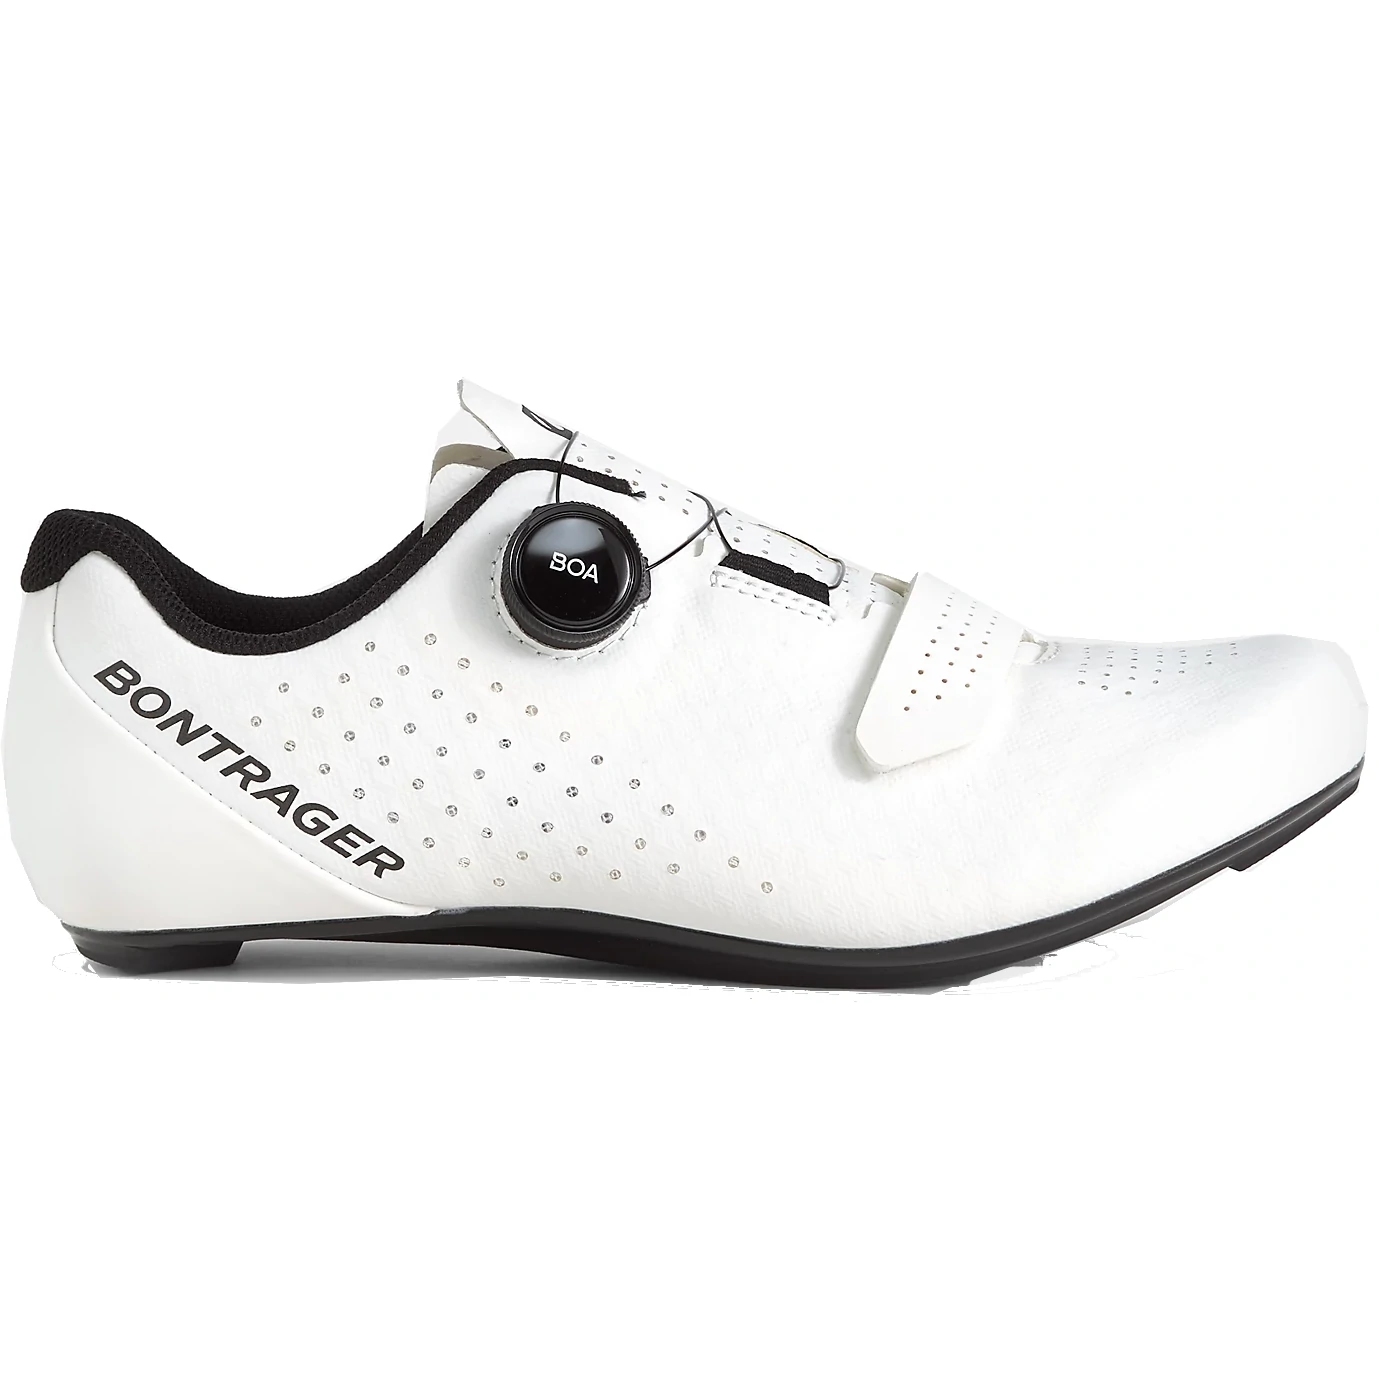 Picture of Bontrager Circuit Road Bike Shoe - white